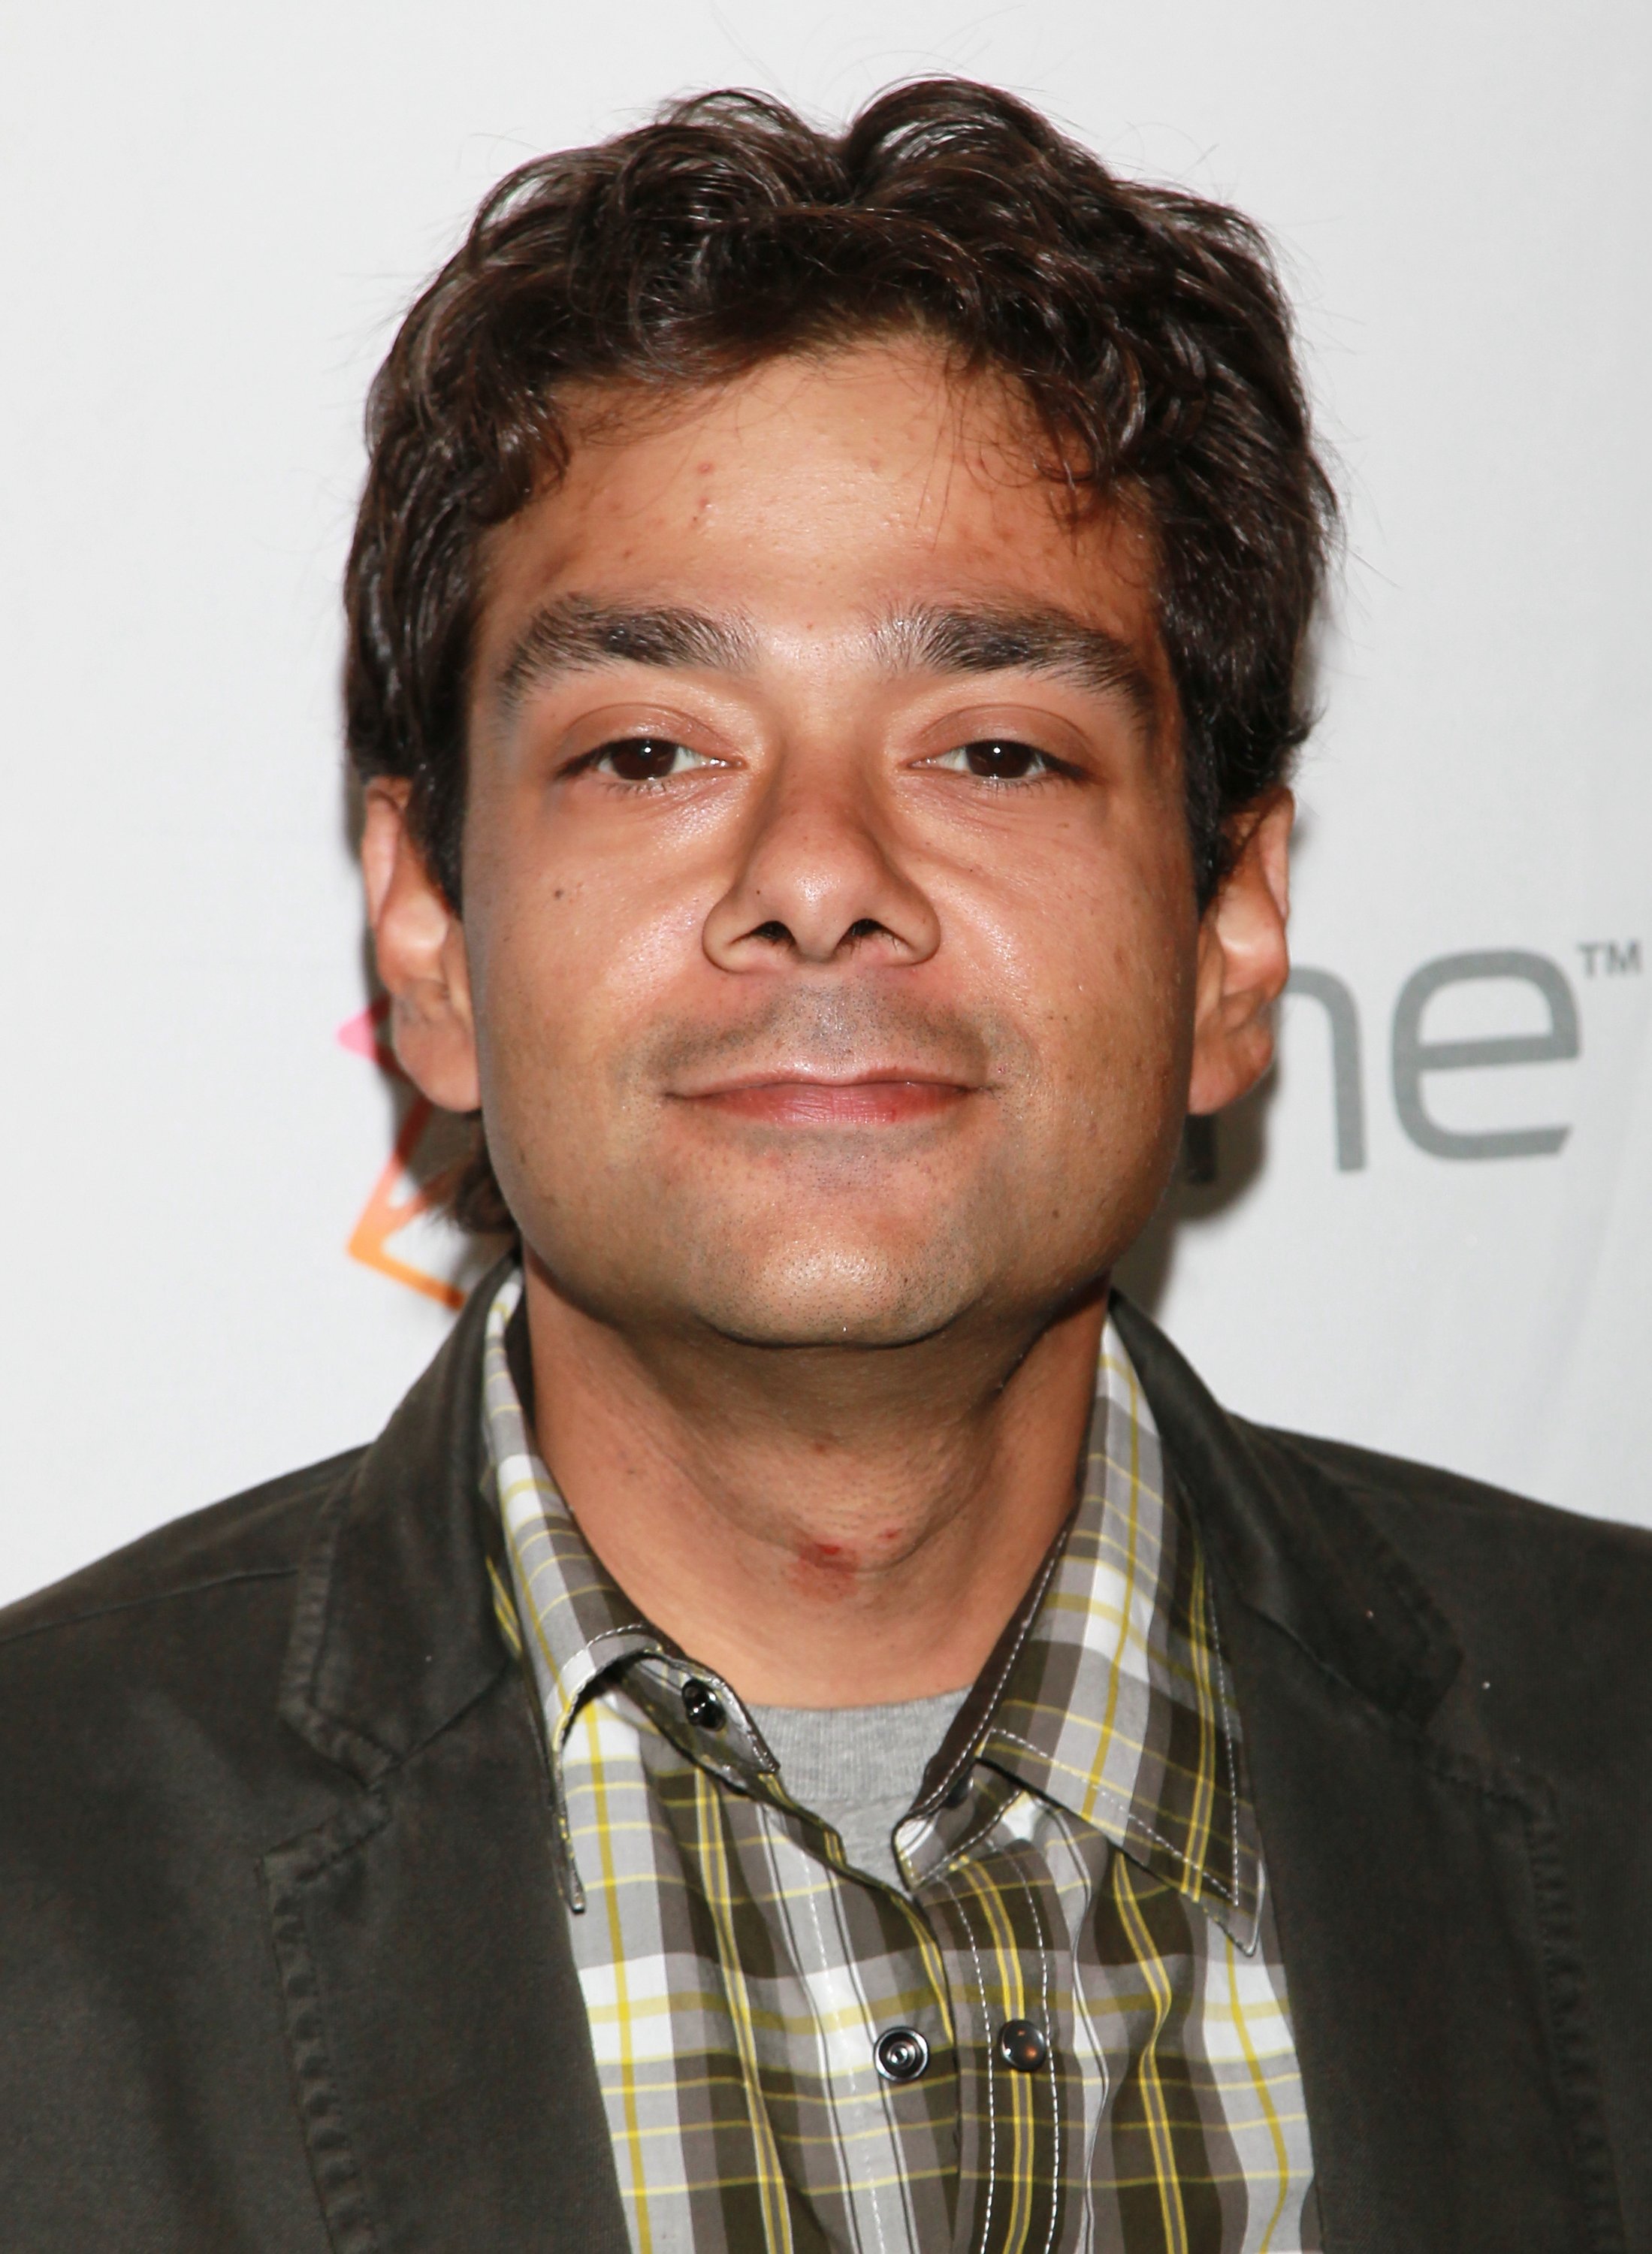 Shaun Weiss attends the Paley Center for Media's PaleyFest 2011 event honoring "Freaks & Geeks" and "Undeclared" on March 12, 2011. | Source: Getty Images